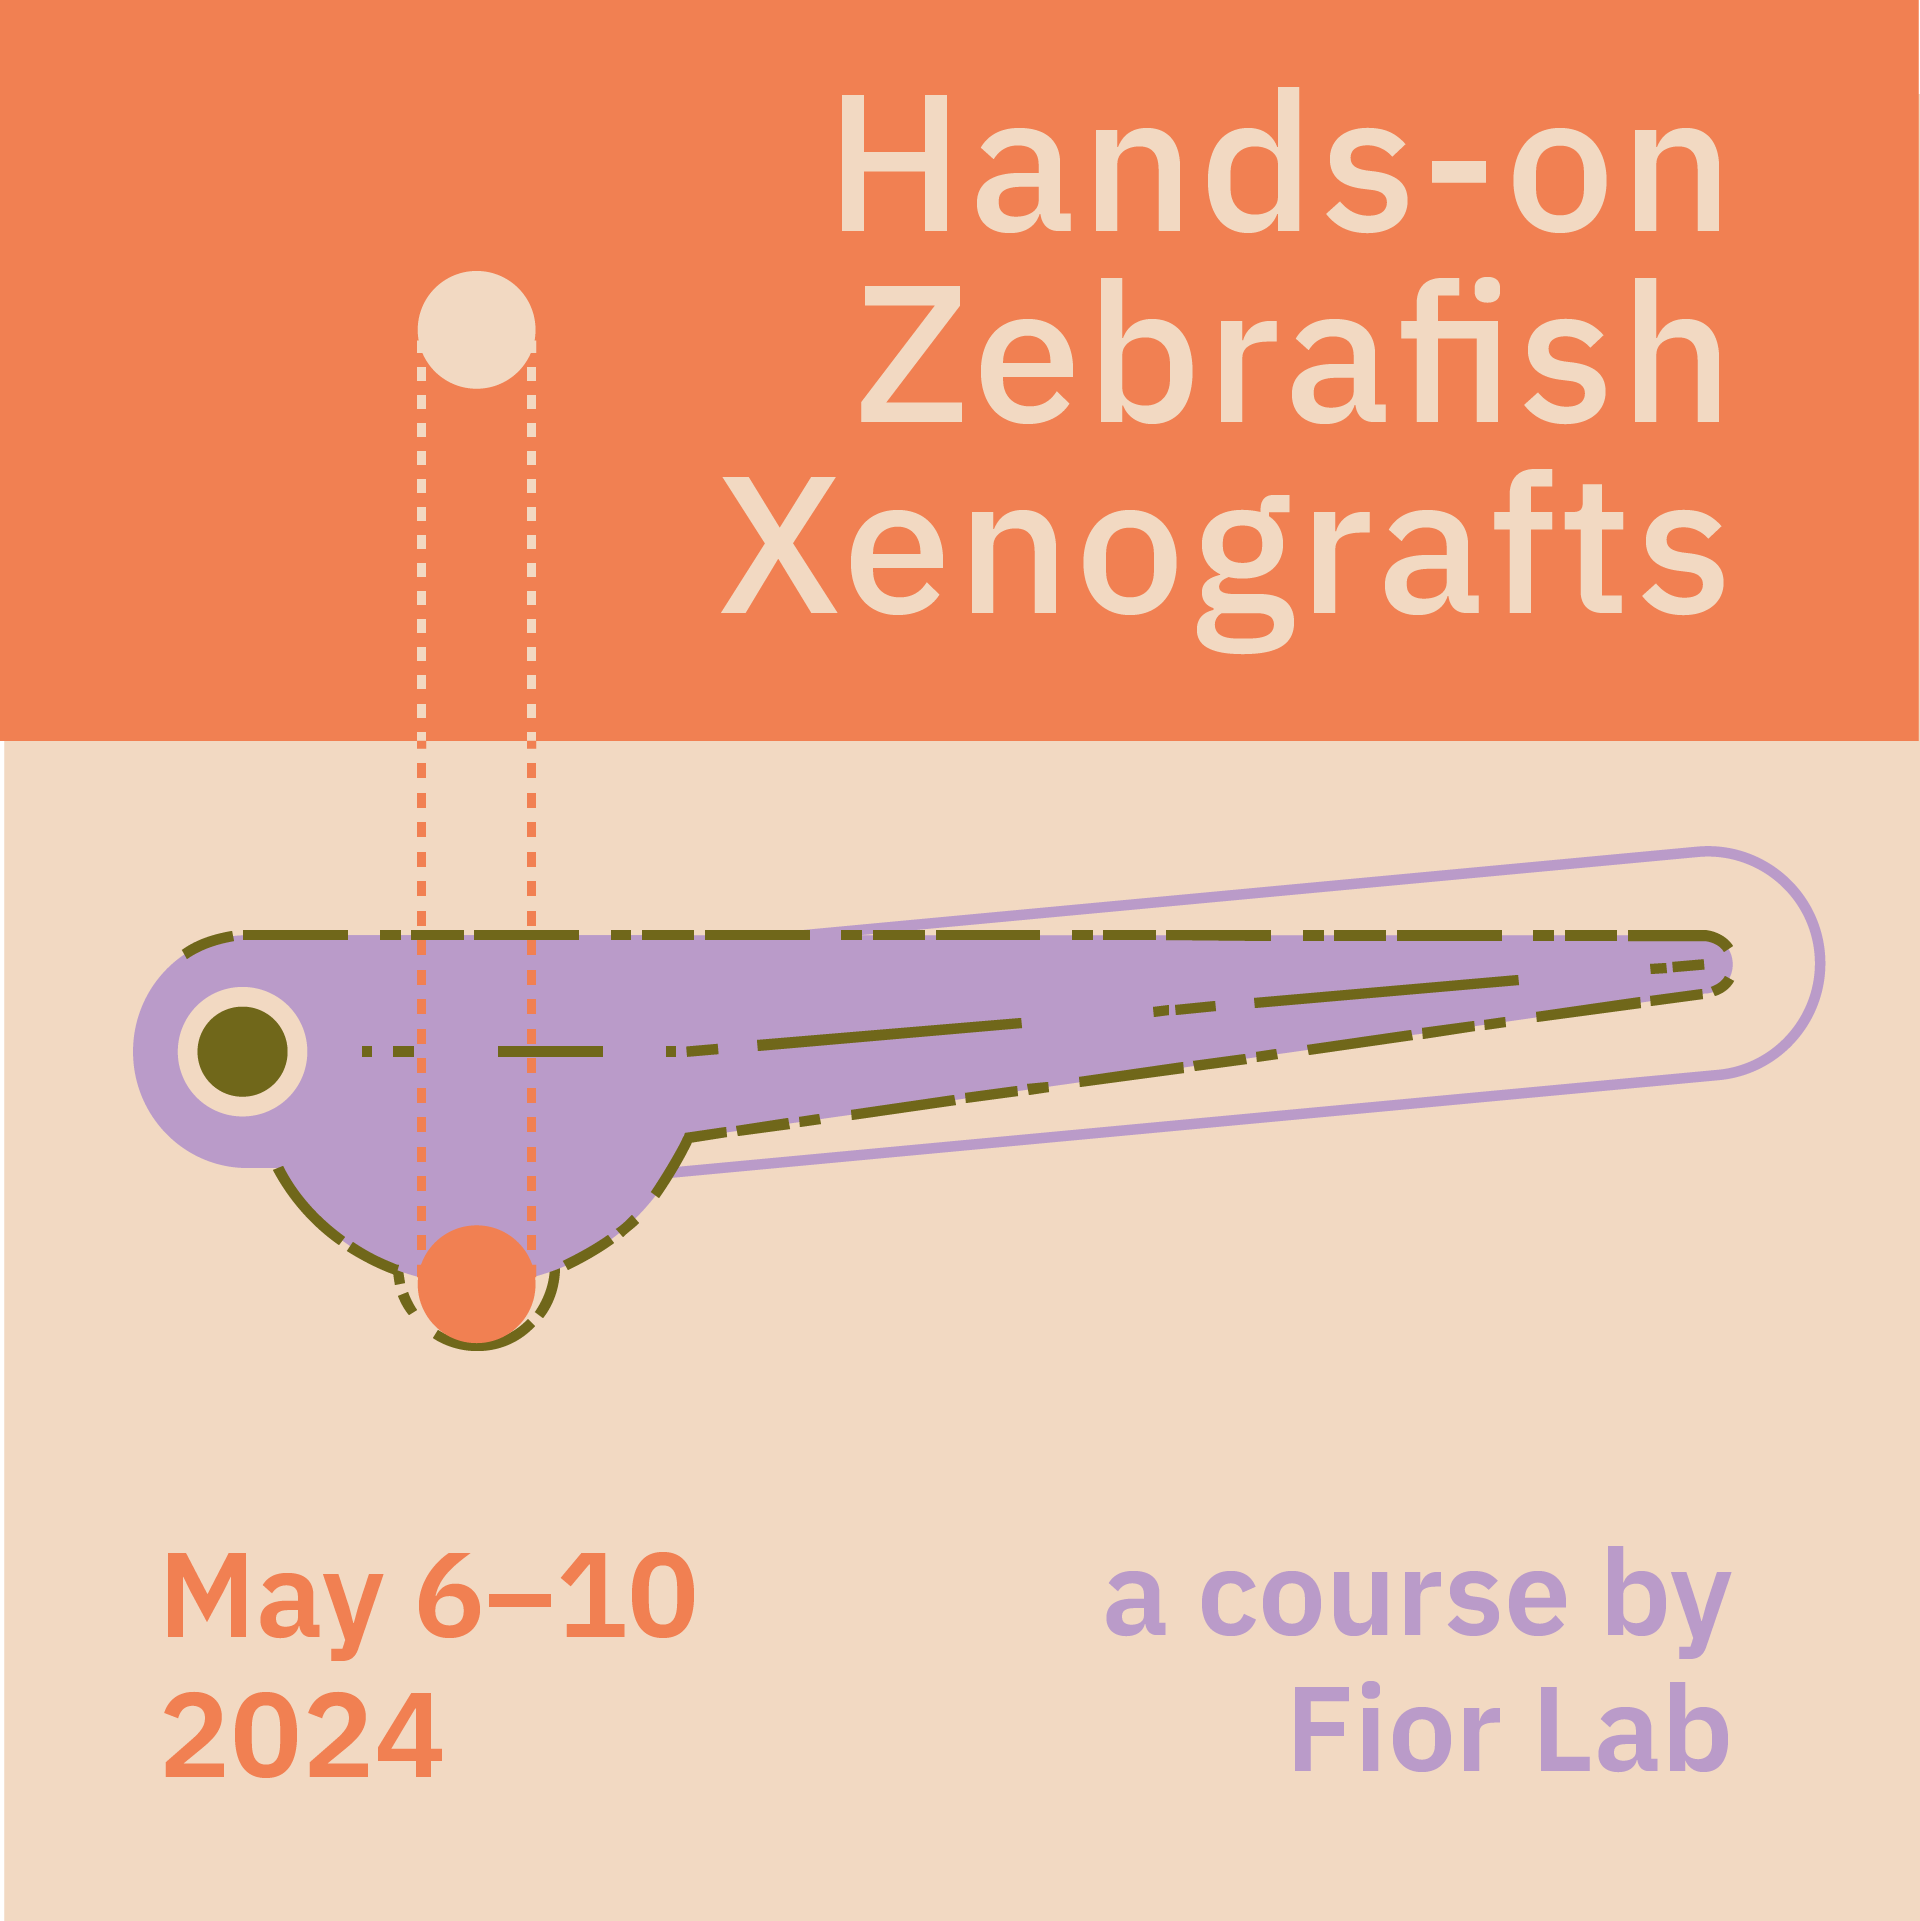 Hands-on course on Zebrafish Xenografts 2024 - 4th edition